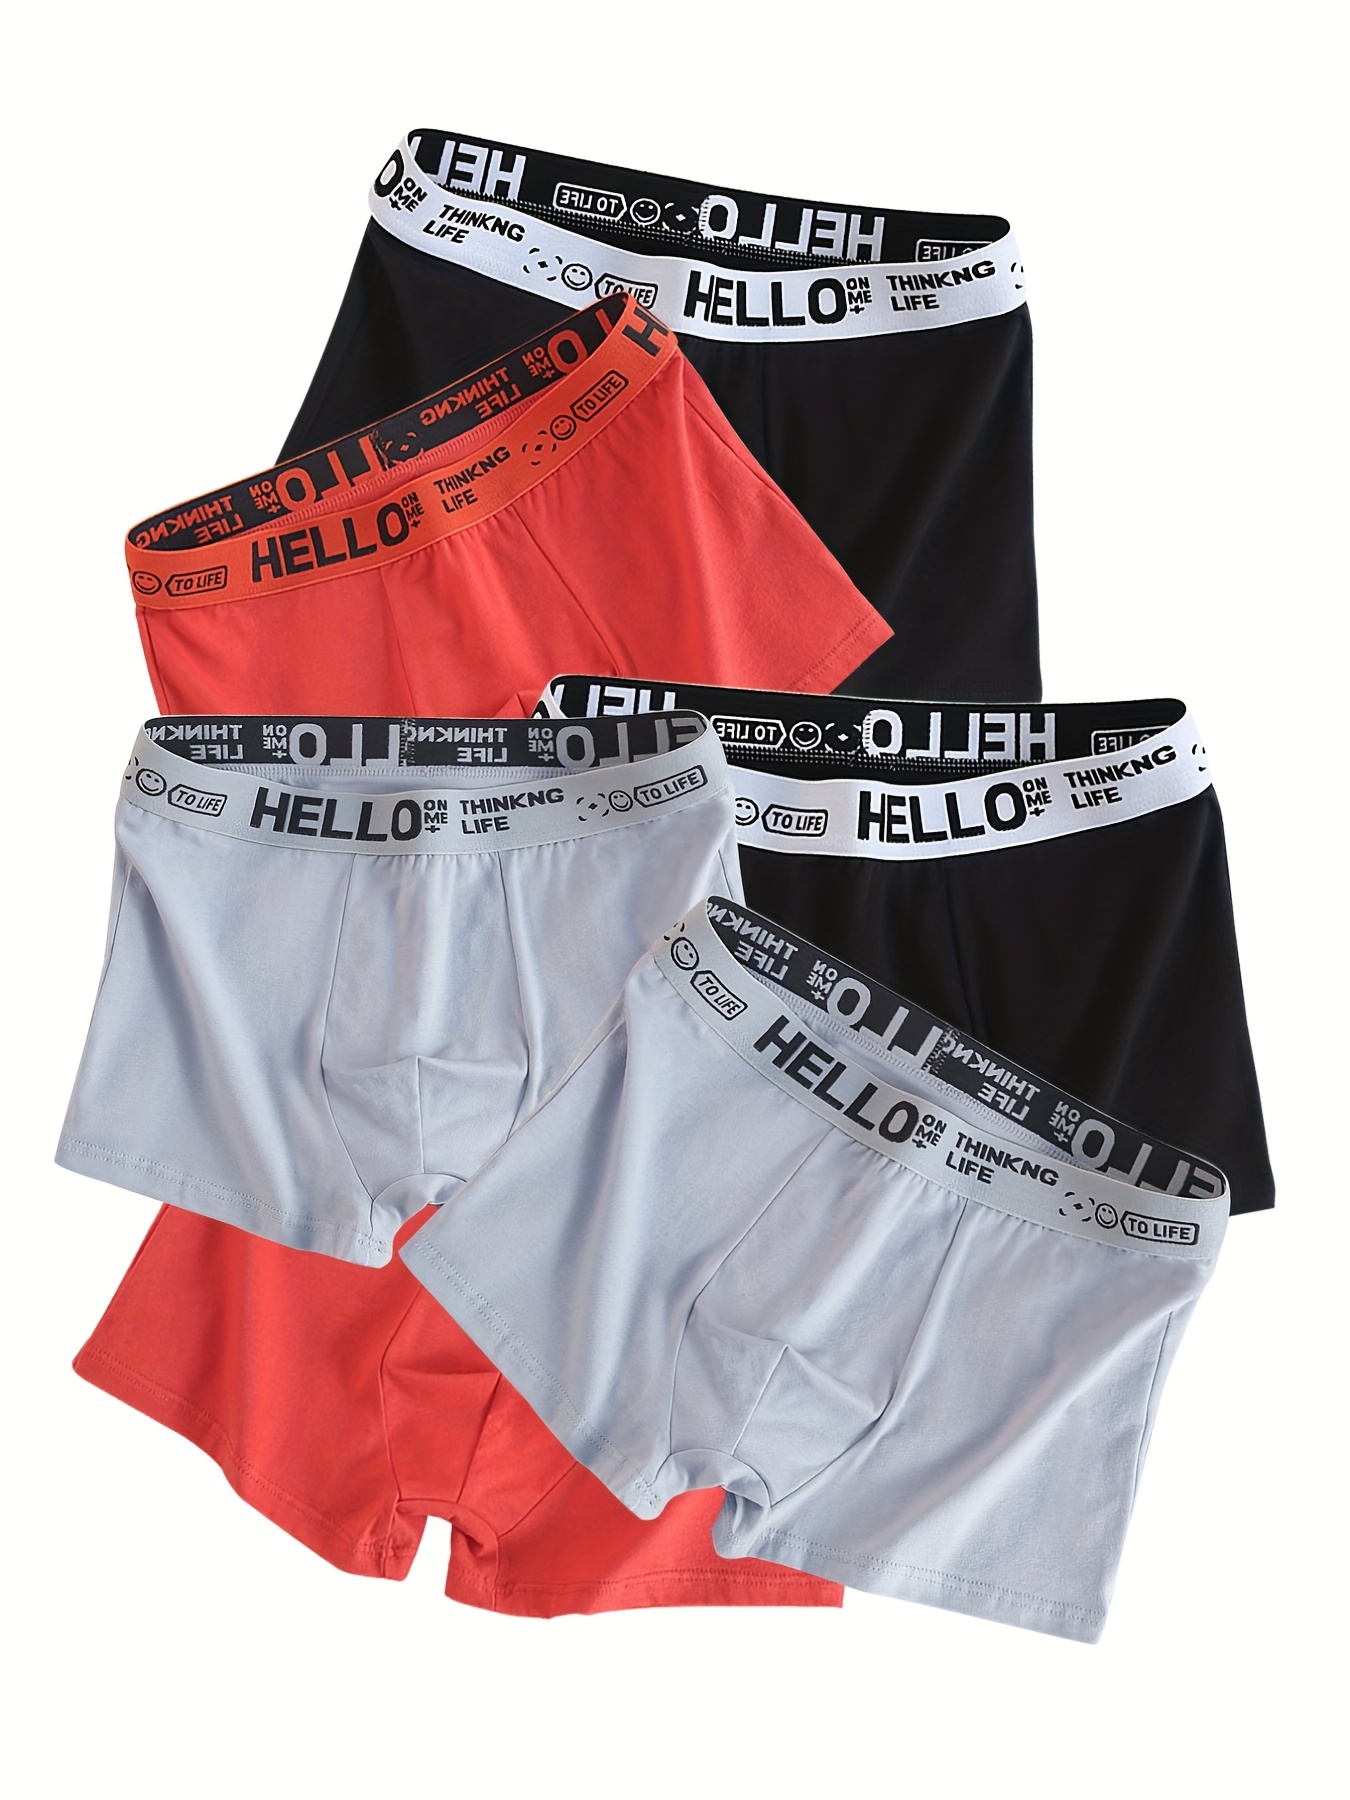 white red solid color men's briefs